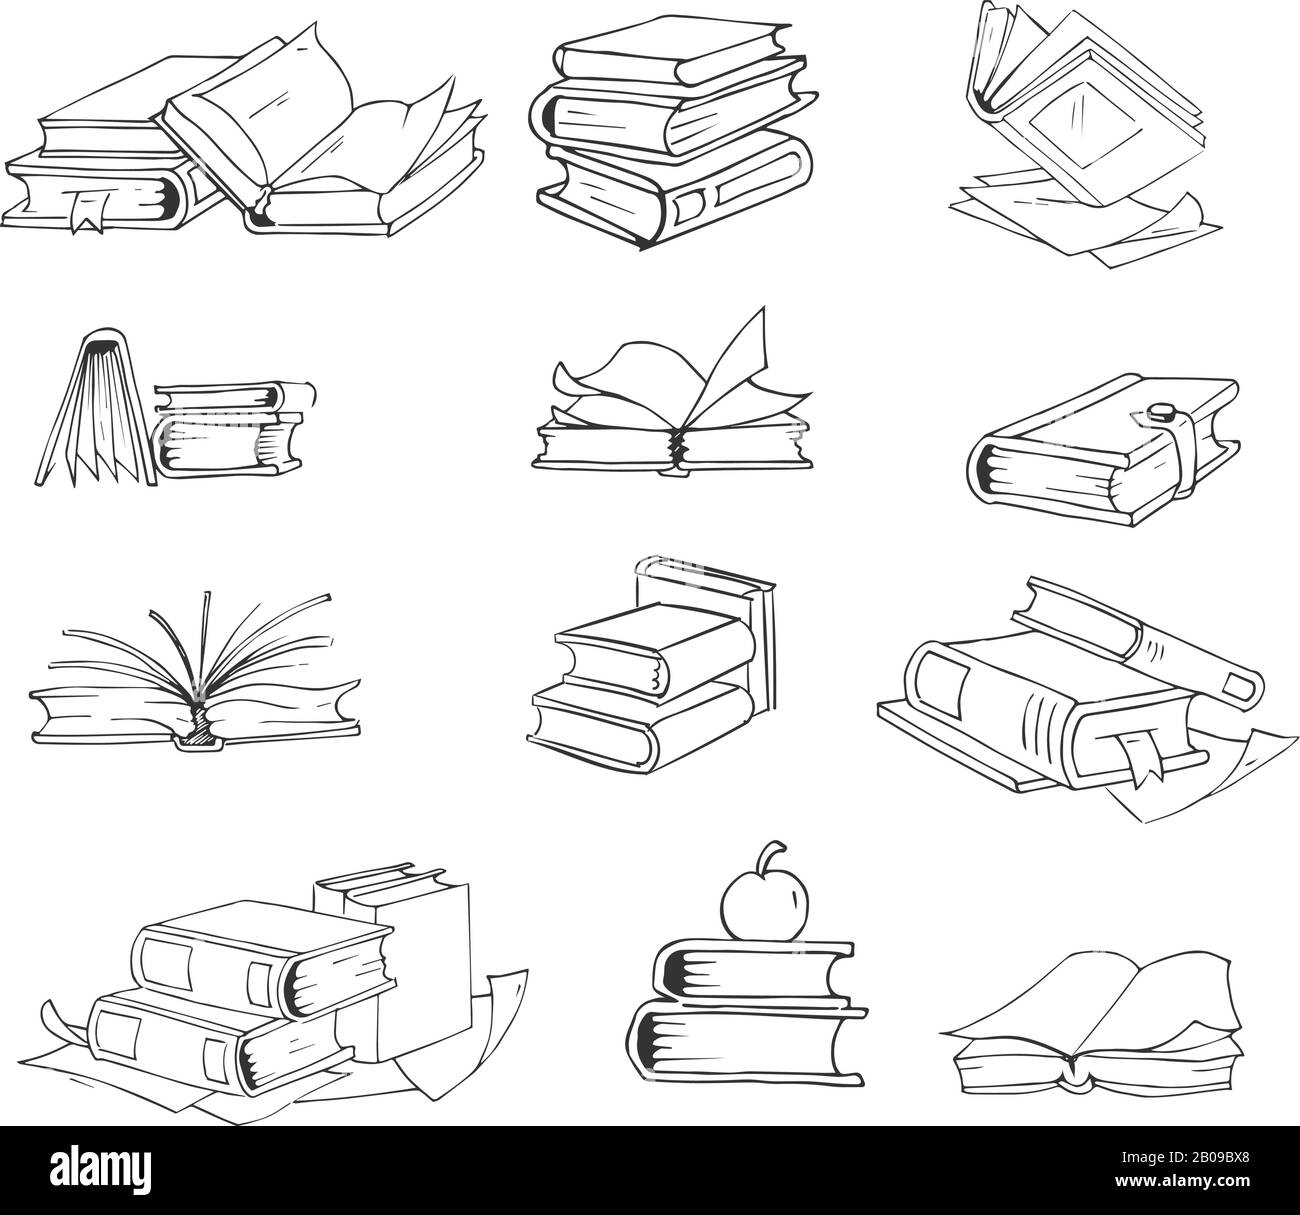 Doodle, hand drawn sketch books vector set. Stack of books, and open book illustration Stock Vector